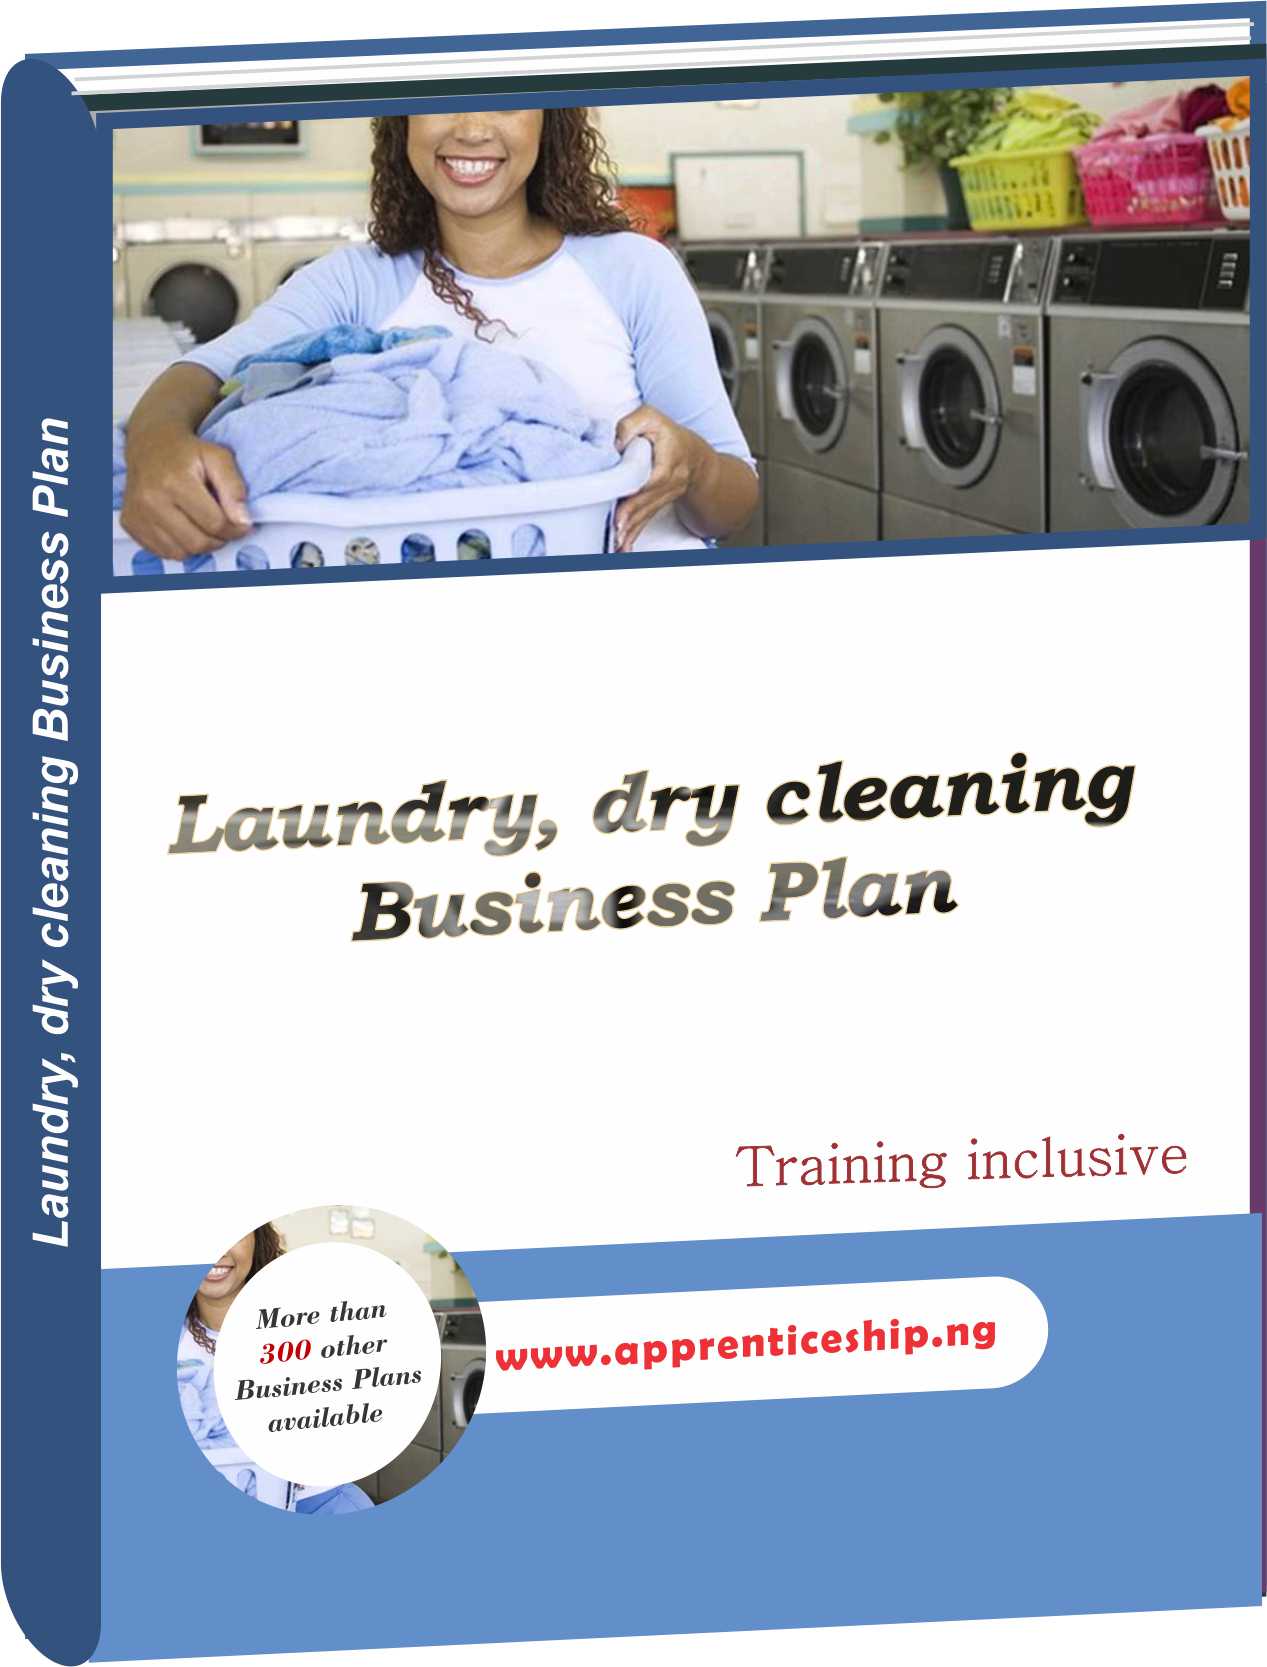 business plan for laundry services in nigeria